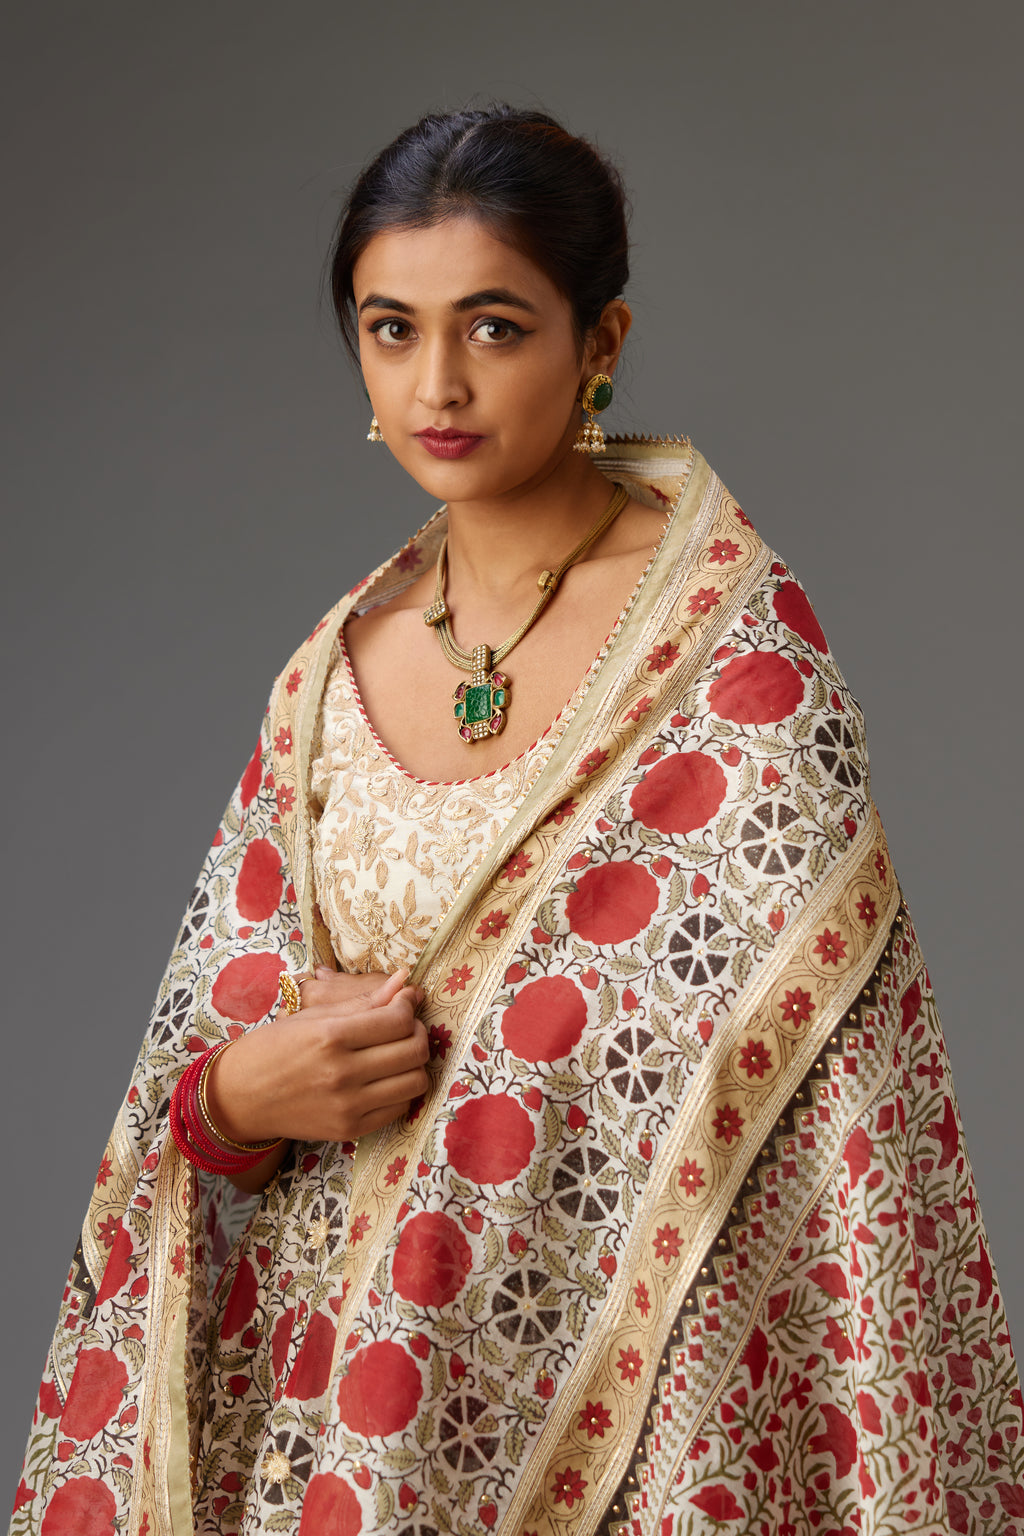 Red and off-white silk chanderi hand block printed dupatta, highlighted with gota embroidery and sequins.